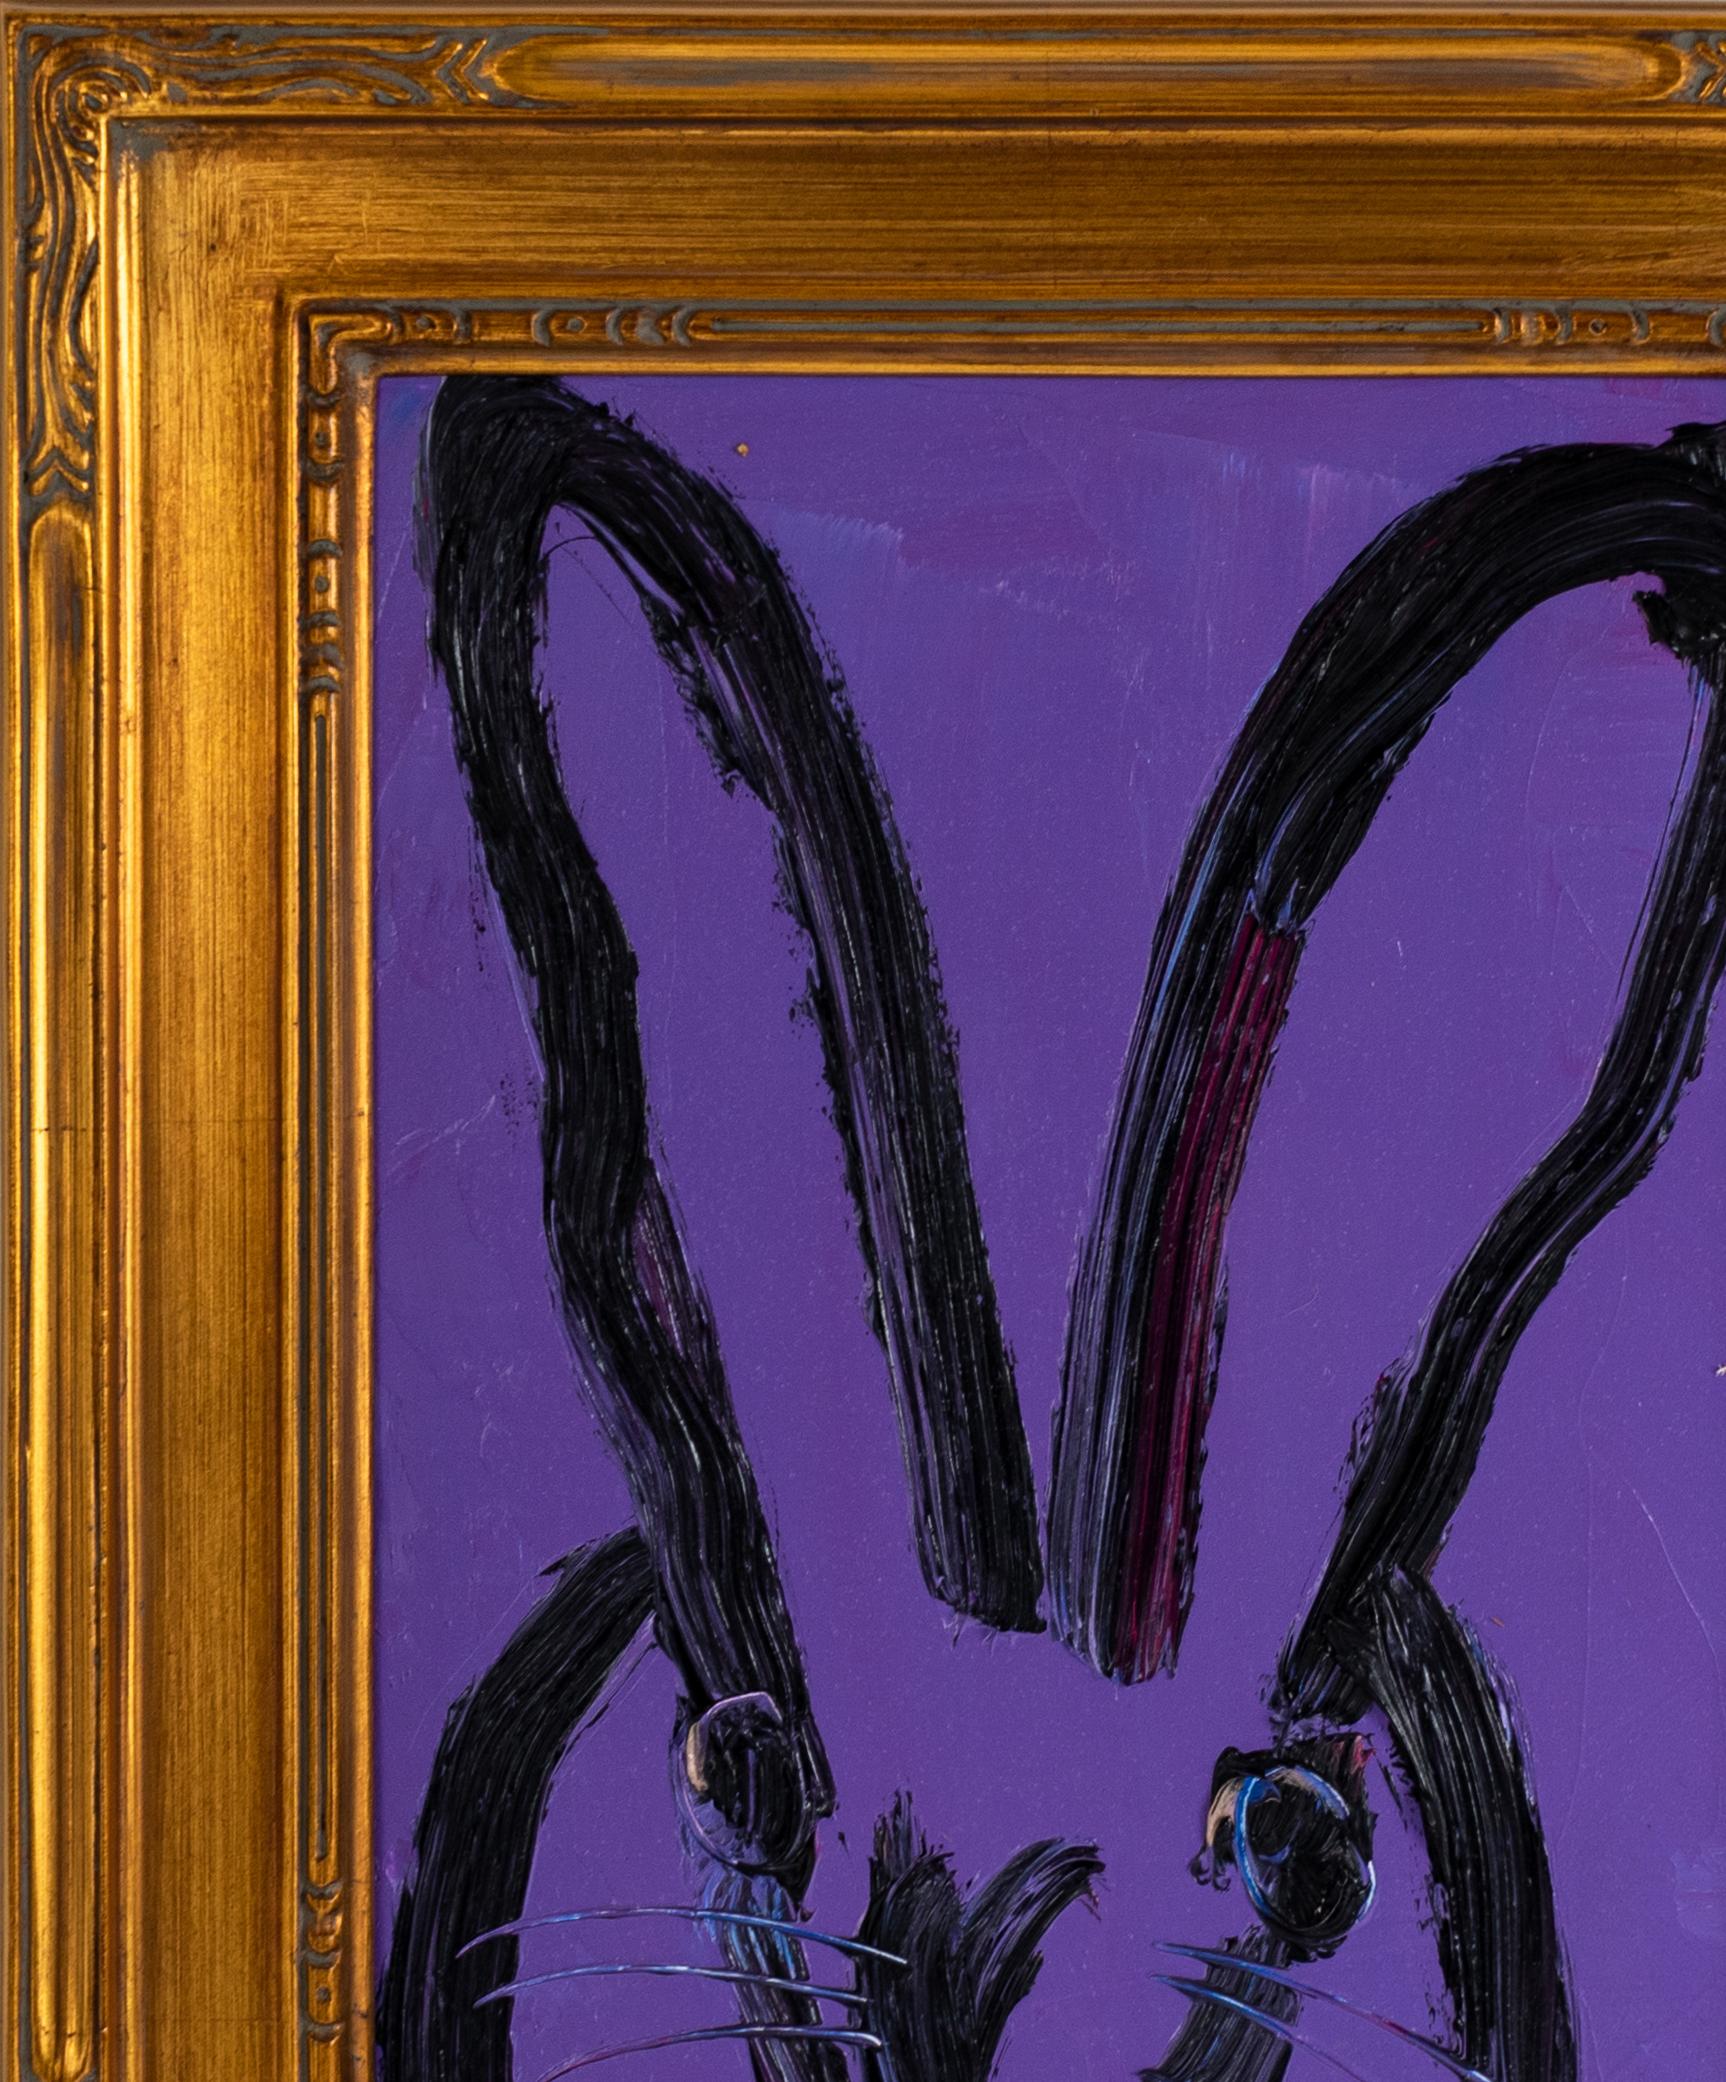 Deep purple background with lots of under layers of paint with a black outline bunny portrait in an ornate gold frame.